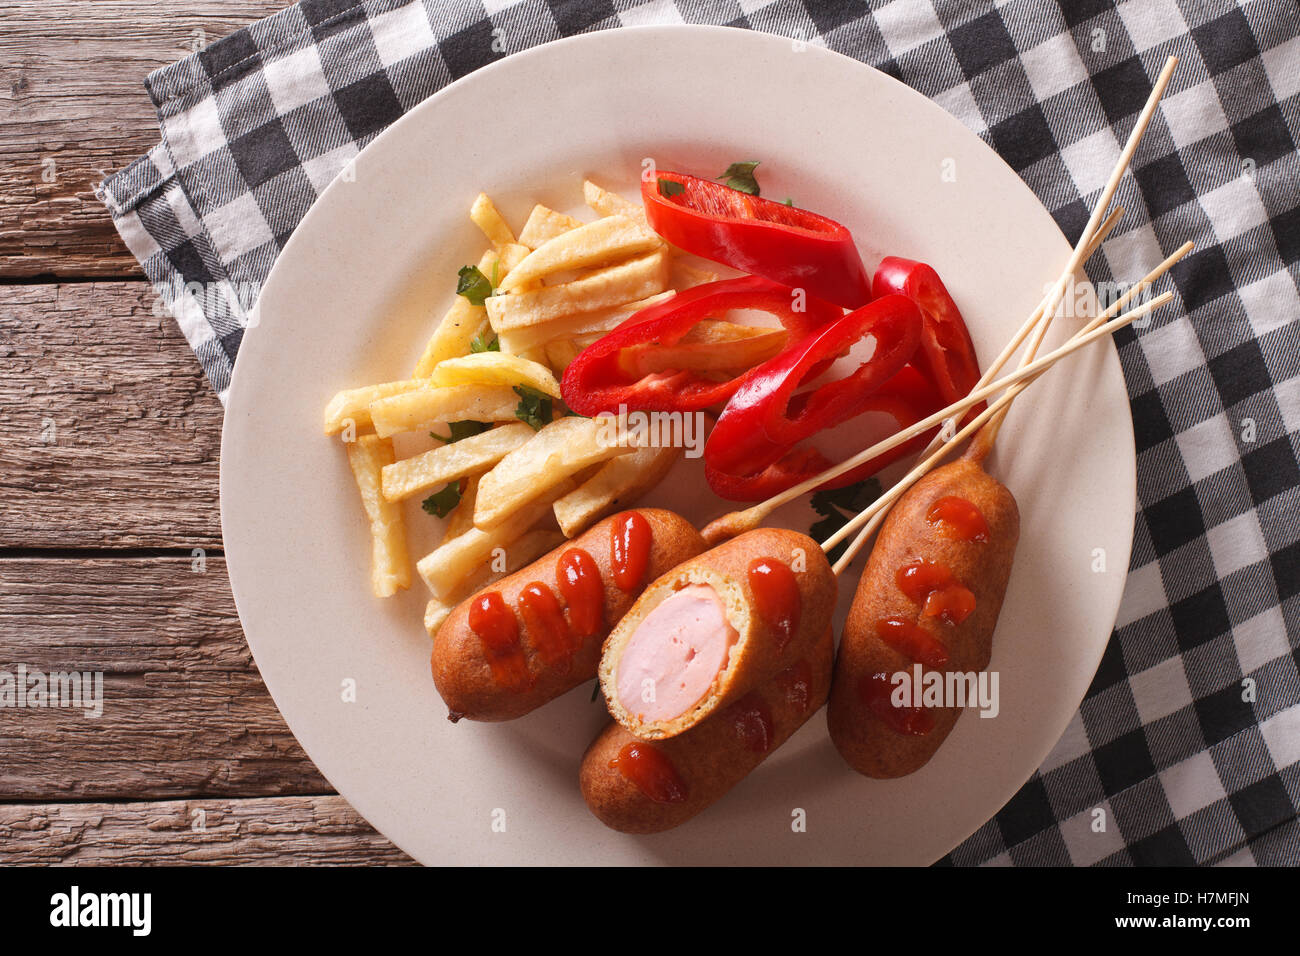 Fast food: corn dog and fries on a plate close-up on the table. horizontal view from above Stock Photo